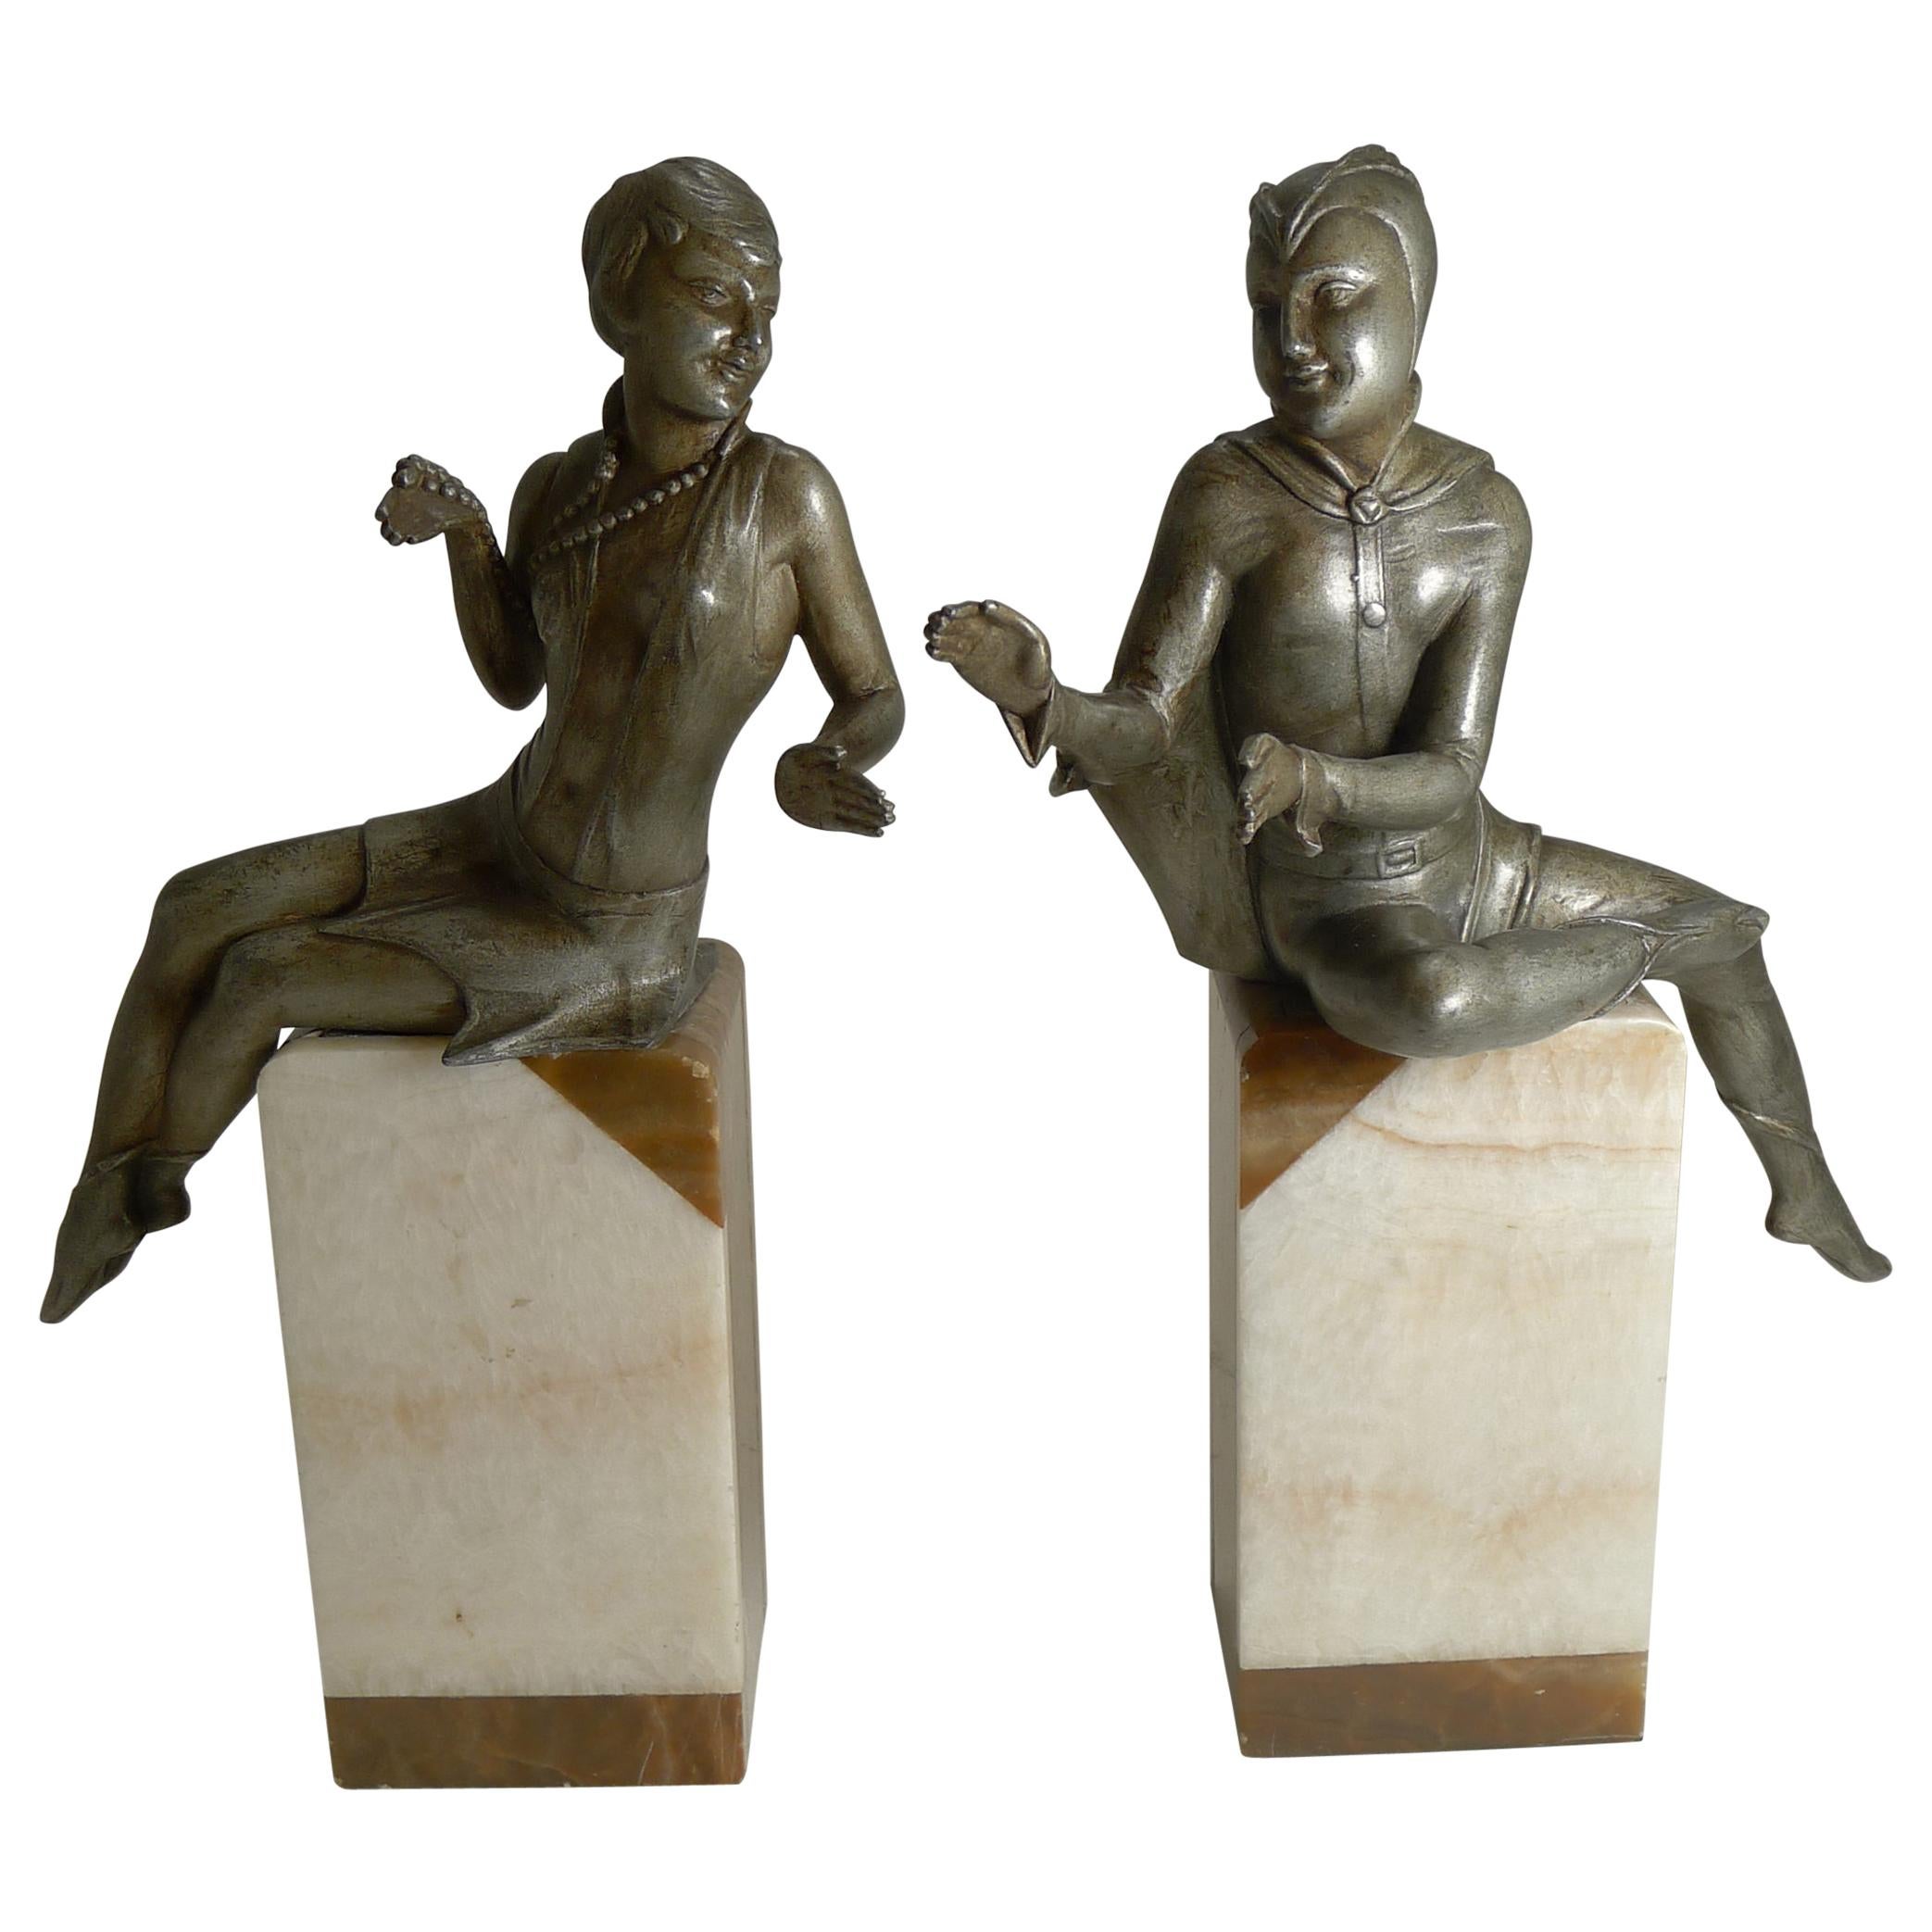 Stylish Pair of Art Deco Figures Signed Salvado, France, circa 1920 / Bookends